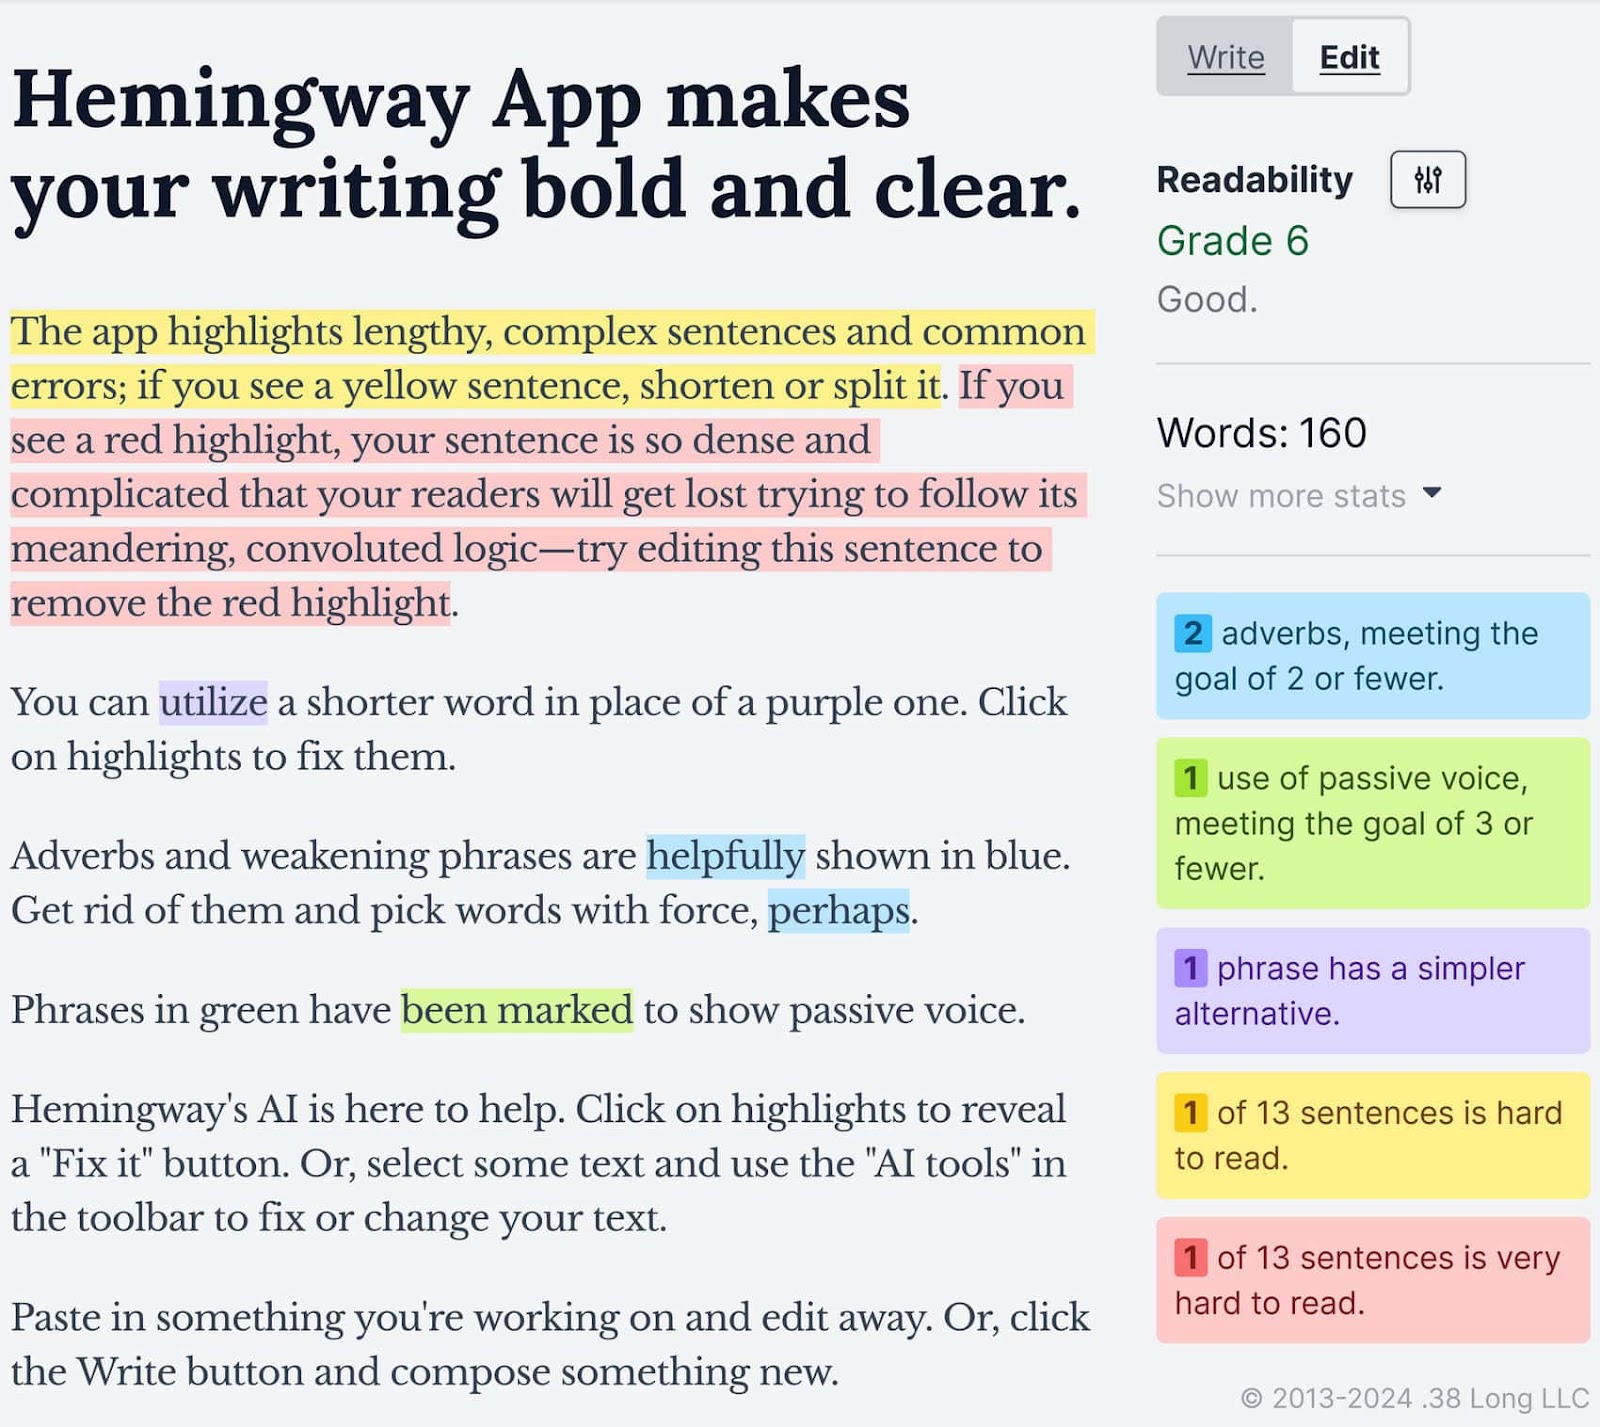 Hemingway App editing interface, showing text with multicolored highlights indicating areas for improvement.